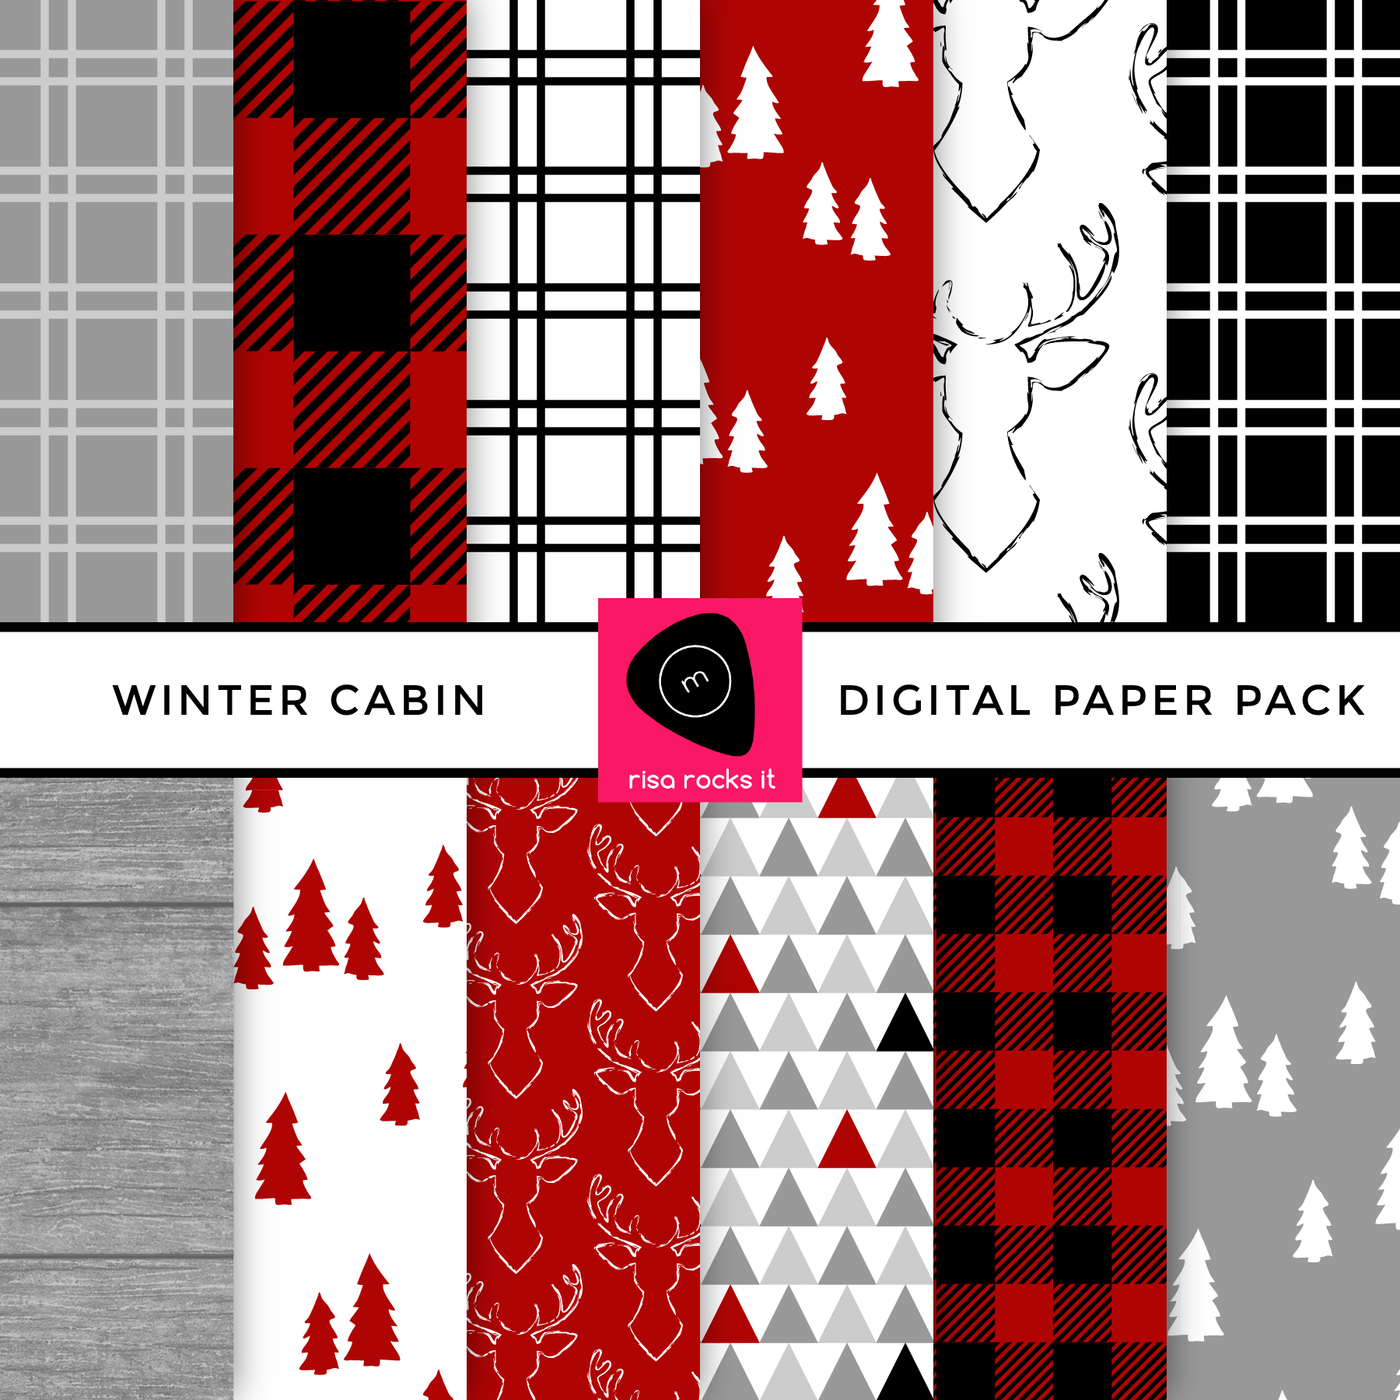 This winter cabin inspired digital paper set features cozy patterns in red, black, white, and shades of grey. Includes buffalo plaid, deer busts, trees, weathered grey wood, and more, for a set of 12 coordinating paper patterns.